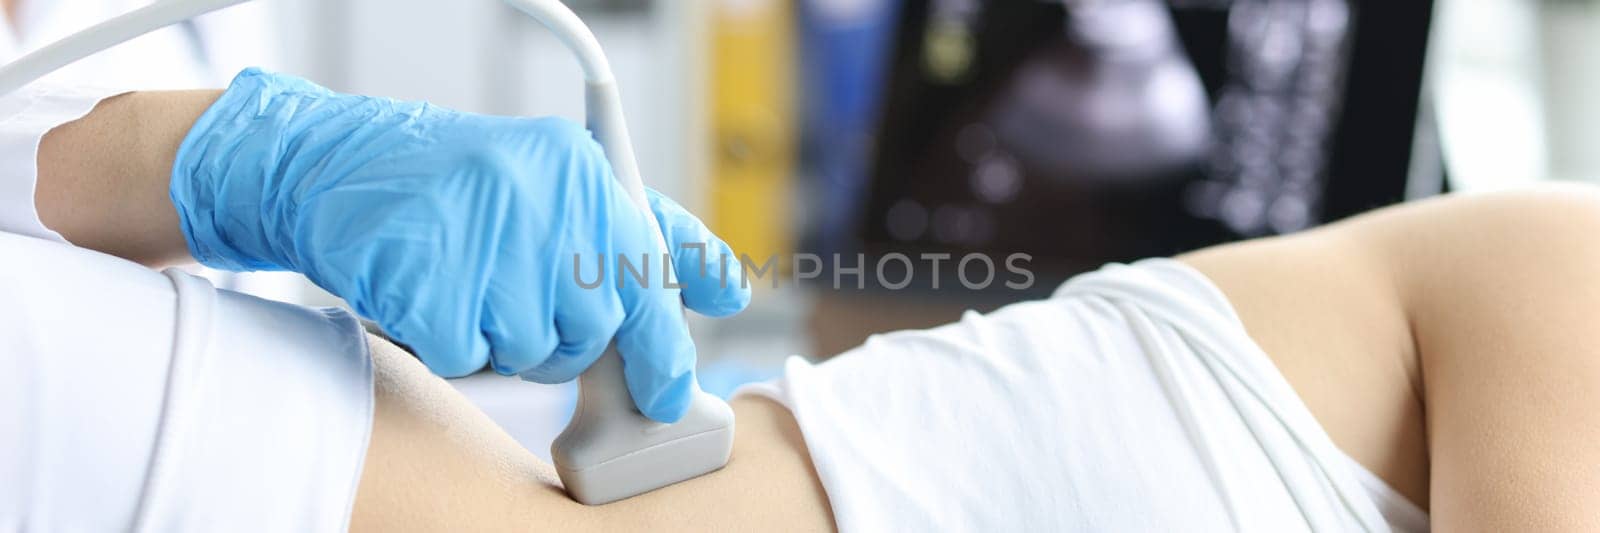 Doctor examines patient with prolapse of left kidney and spleen using ultrasound probe. Ultrasound diagnostics of soft tissues and organs concept